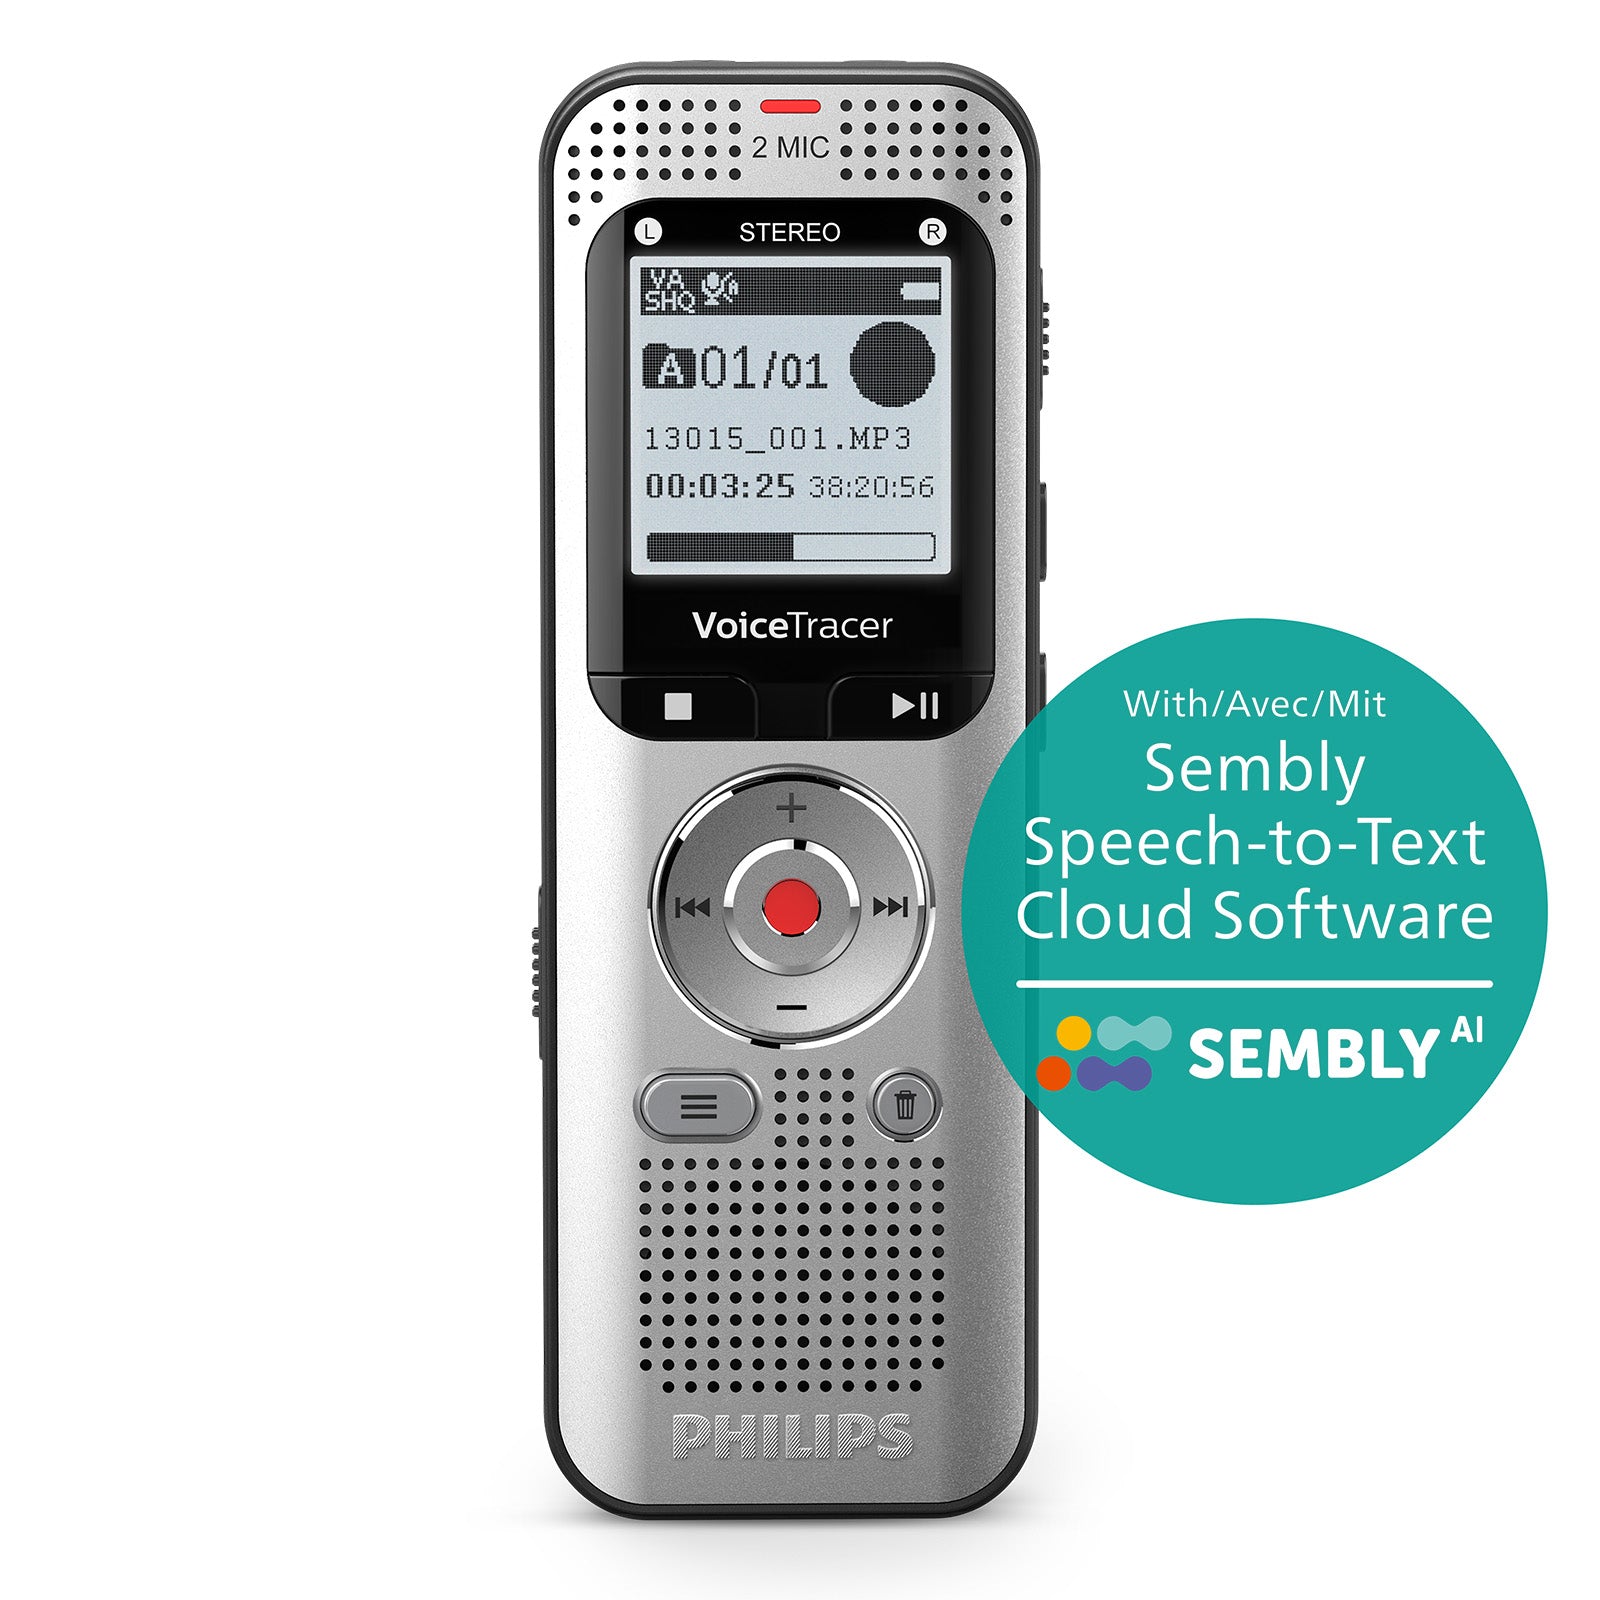 Philips DVT2015 Digital VoiceTracer with Sembly's AI Speech-to-Text Cloud Software